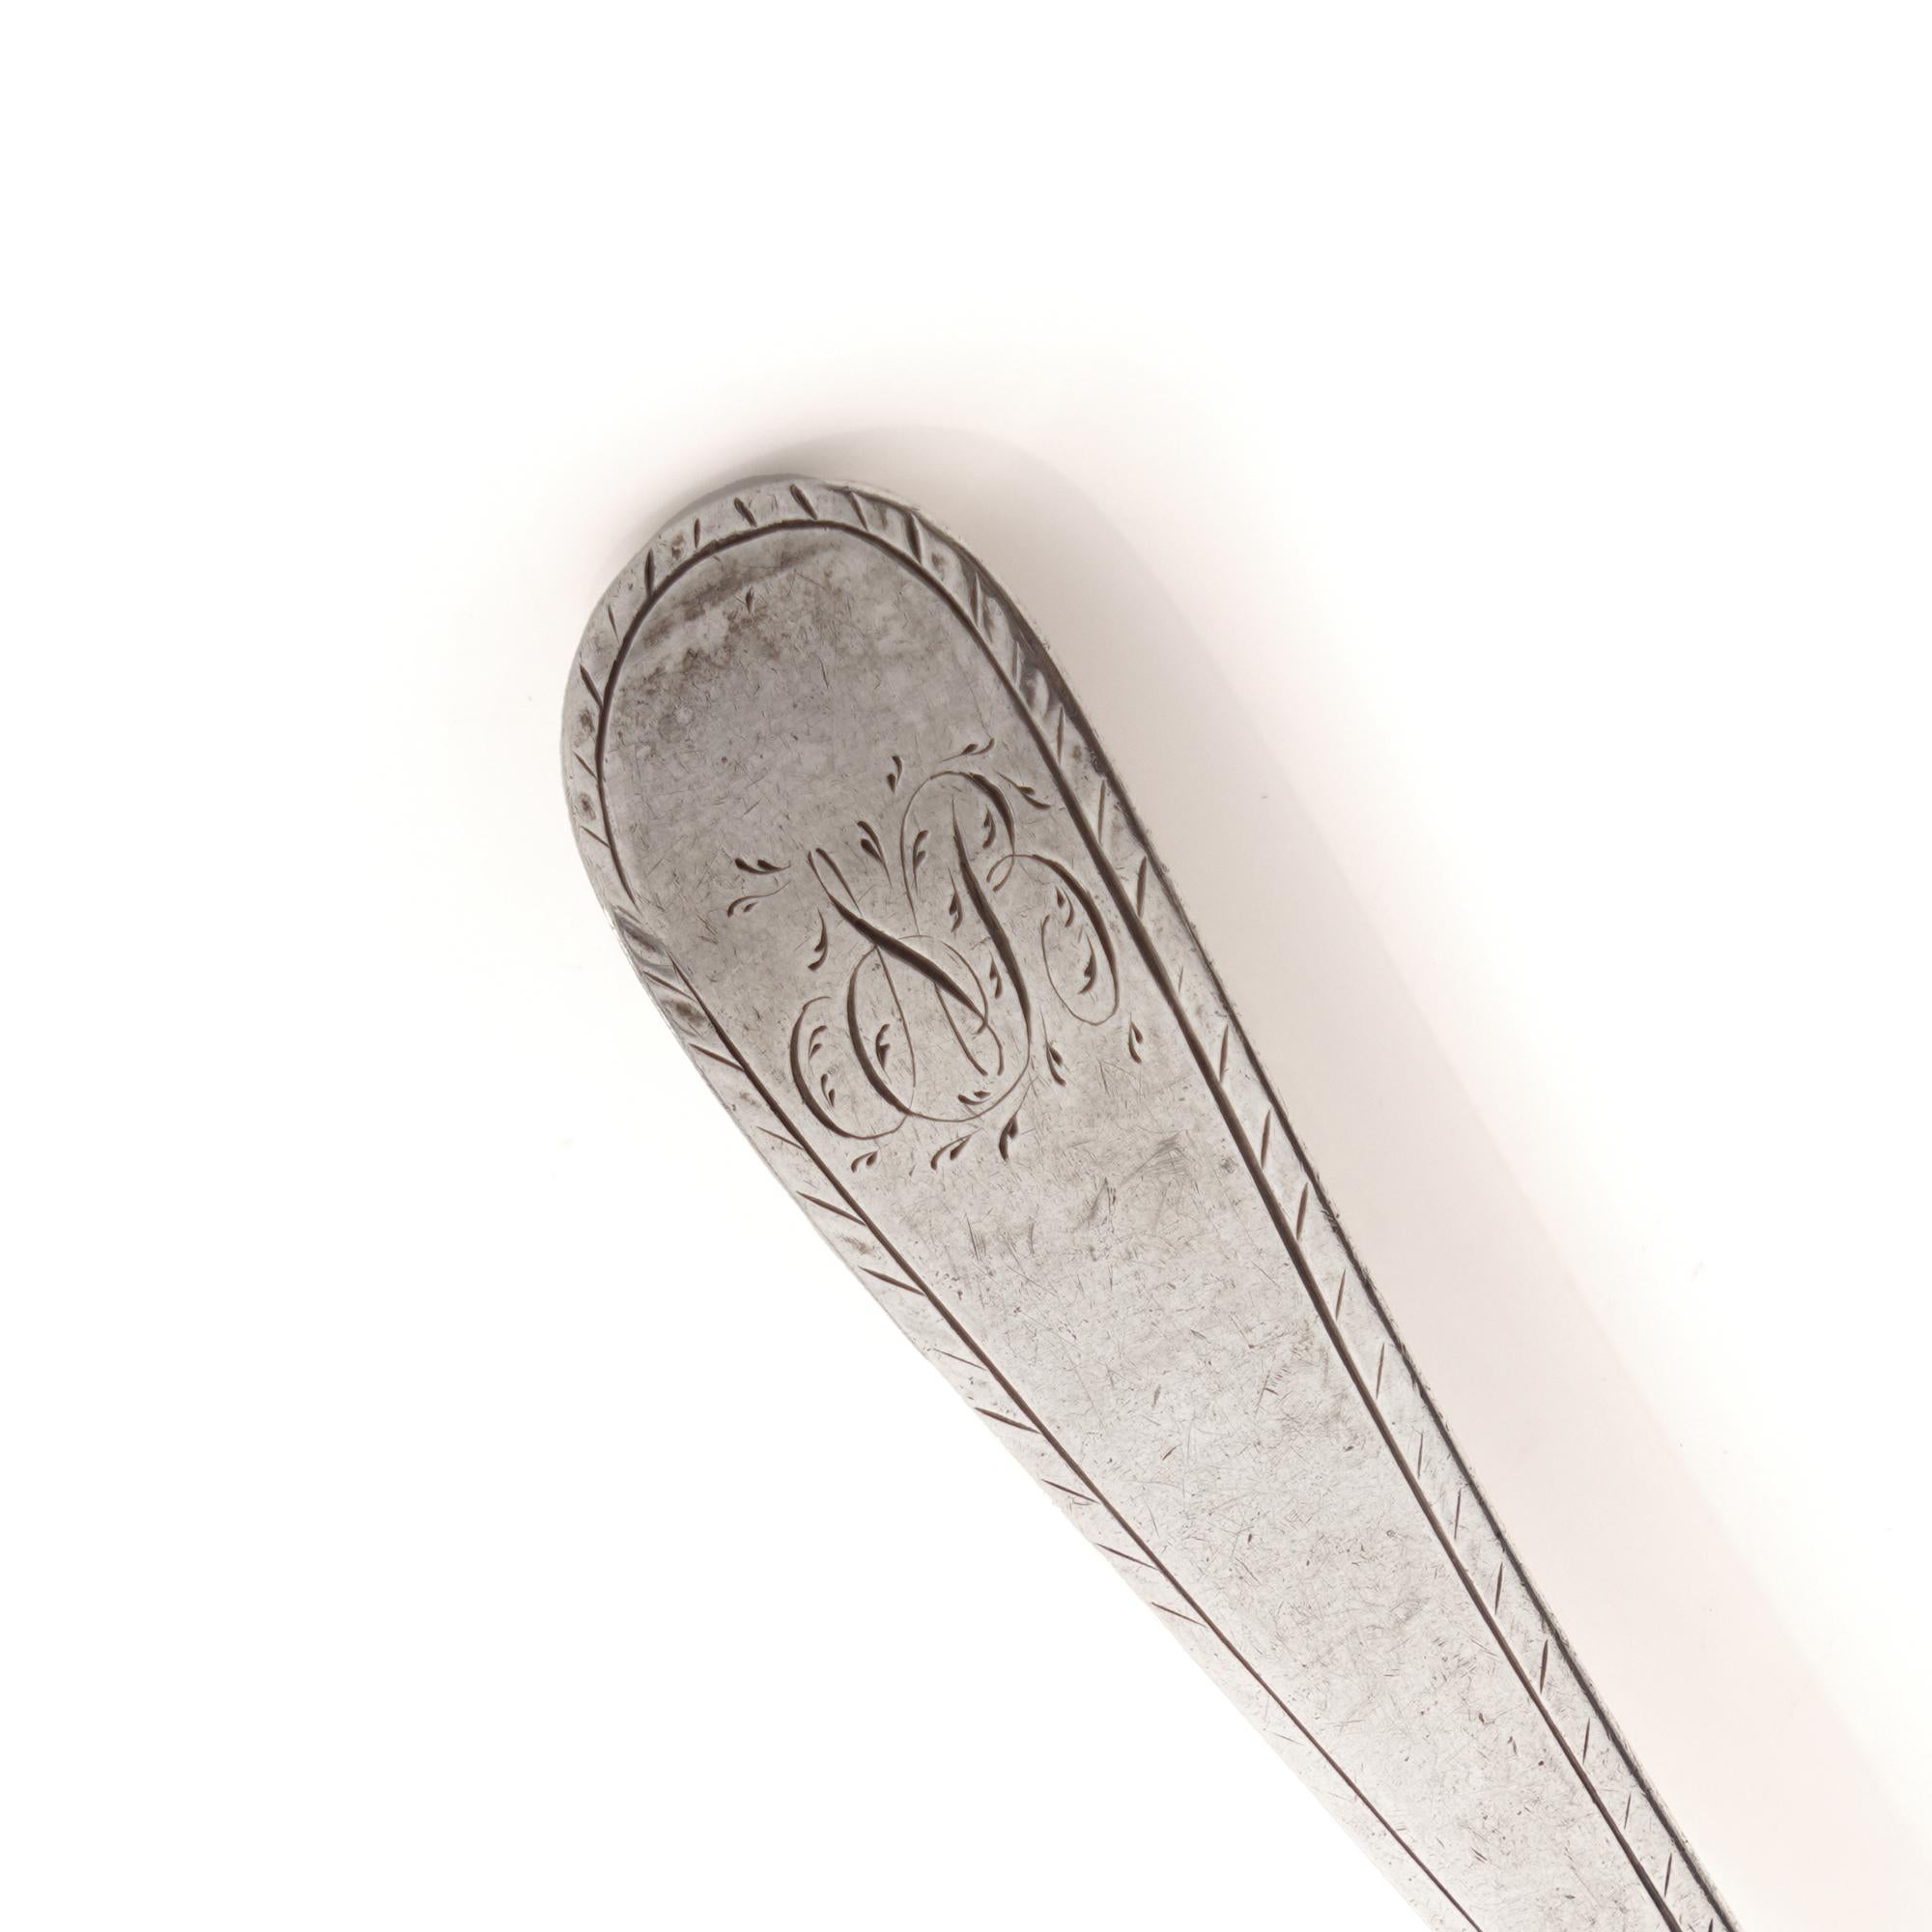 Antique Georgian sterling 925 silver large spoon by Hester Bateman In Good Condition For Sale In Braintree, GB